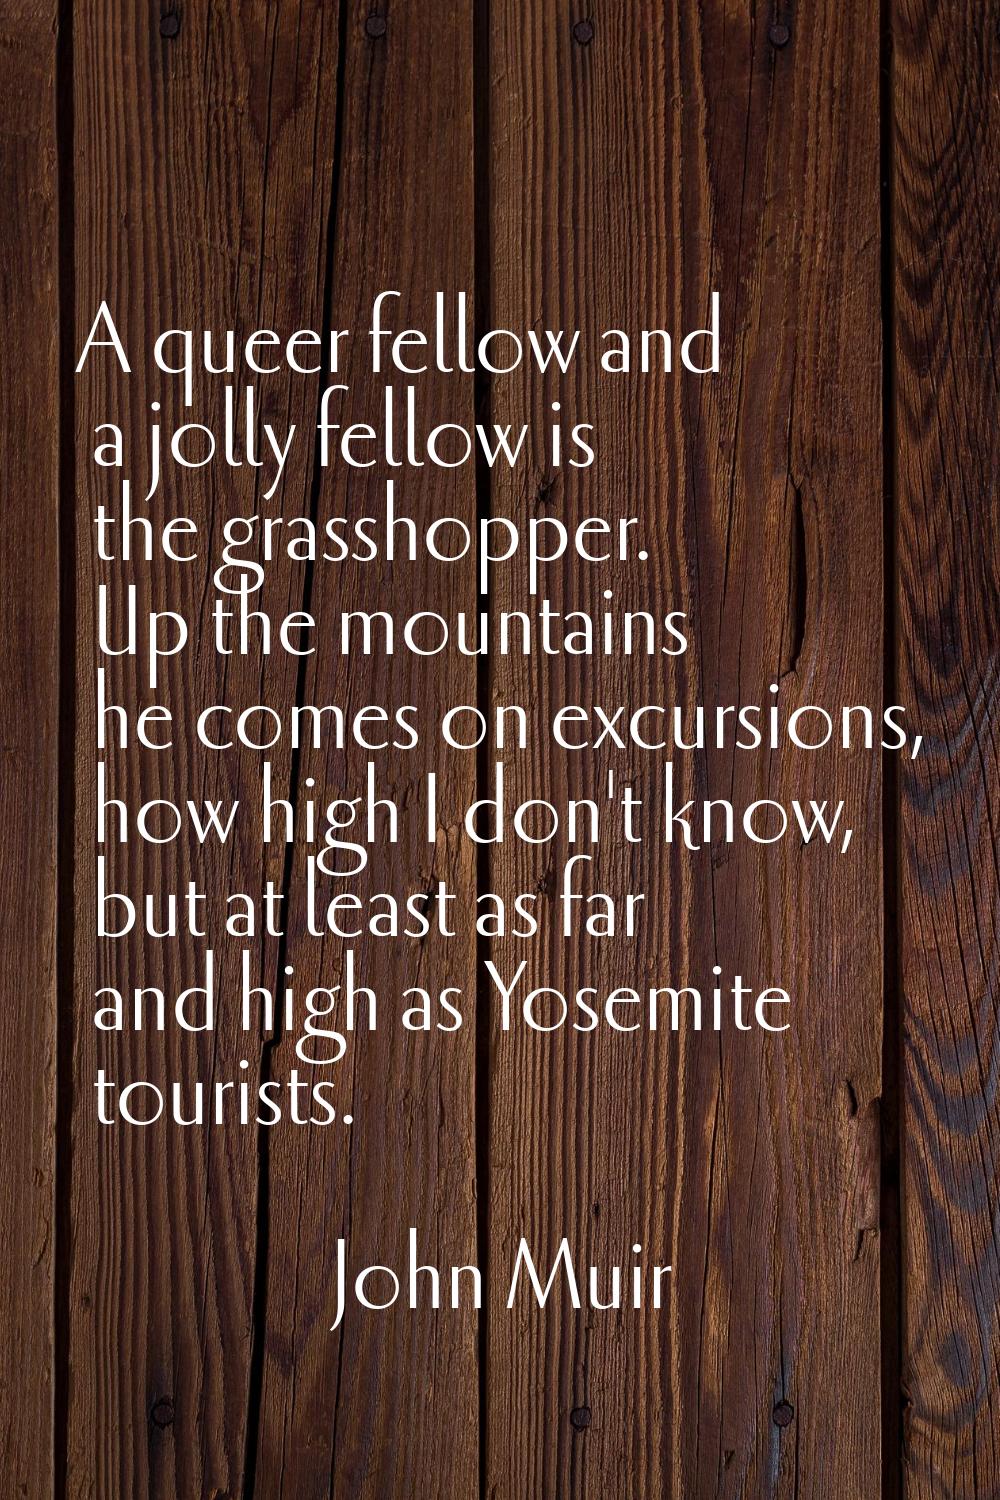 A queer fellow and a jolly fellow is the grasshopper. Up the mountains he comes on excursions, how 